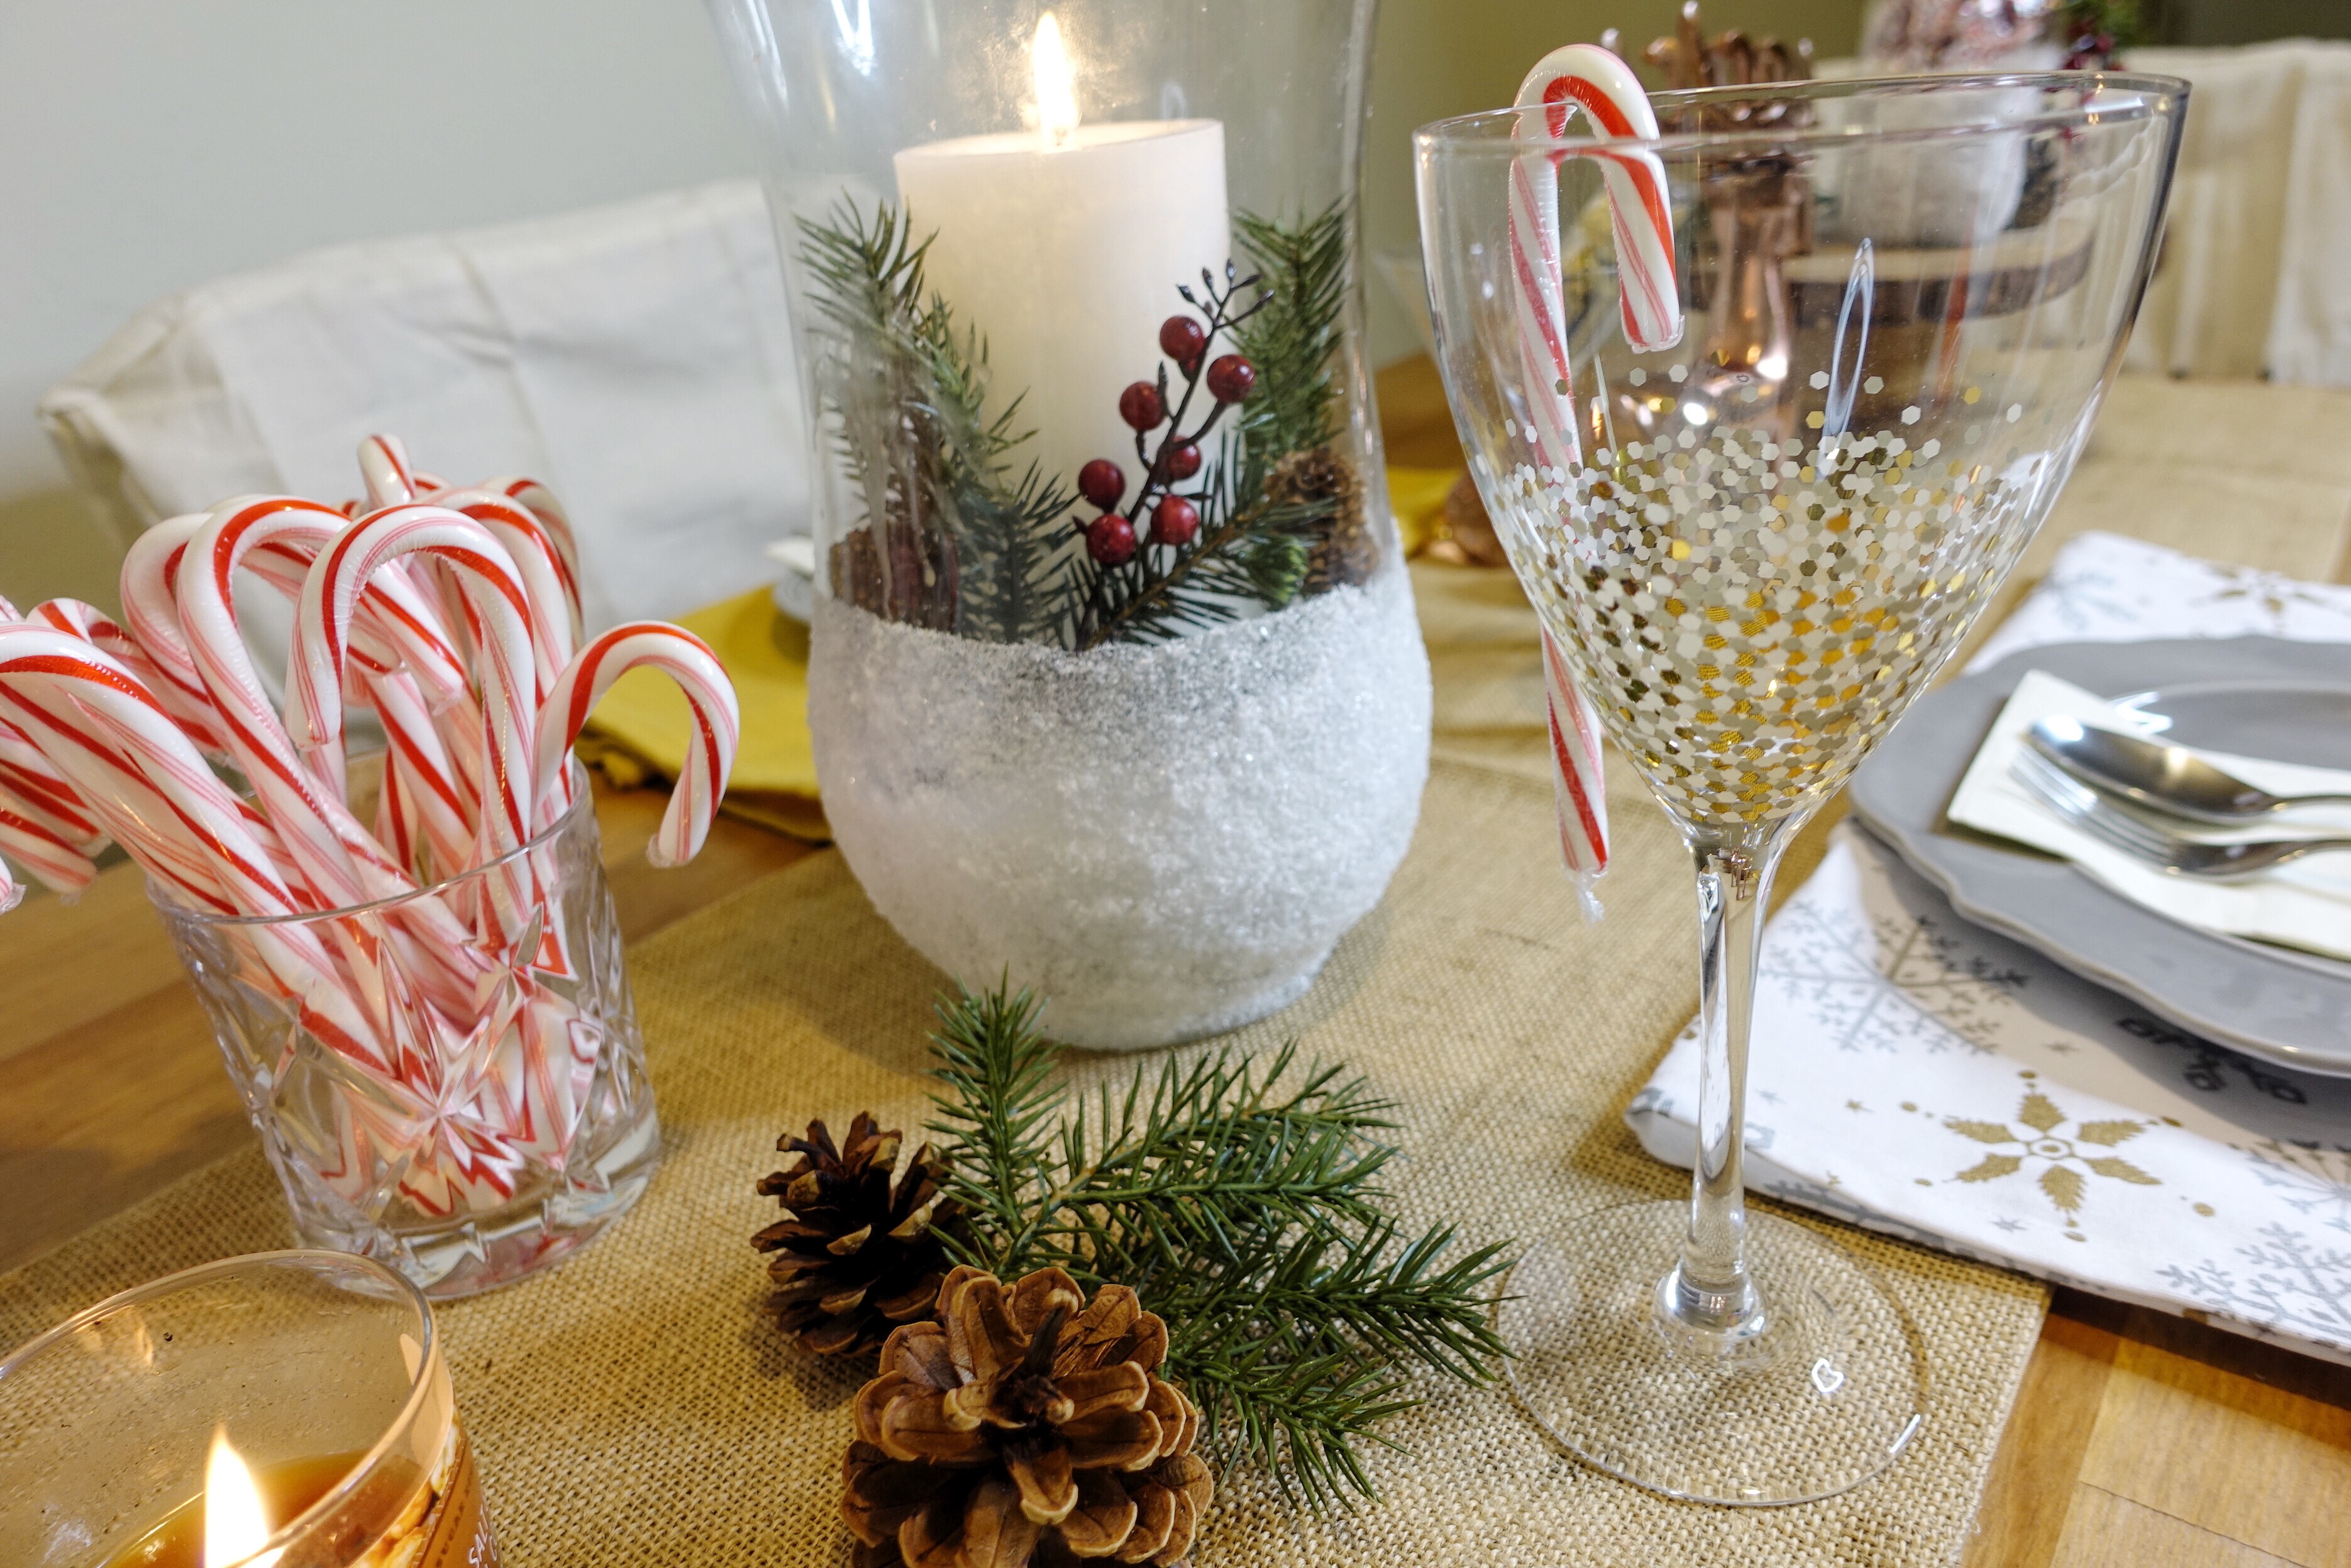 Christmas Martini Glass Centerpiece - DIY  Glass christmas decorations,  Holiday party centerpieces, Christmas centerpieces diy